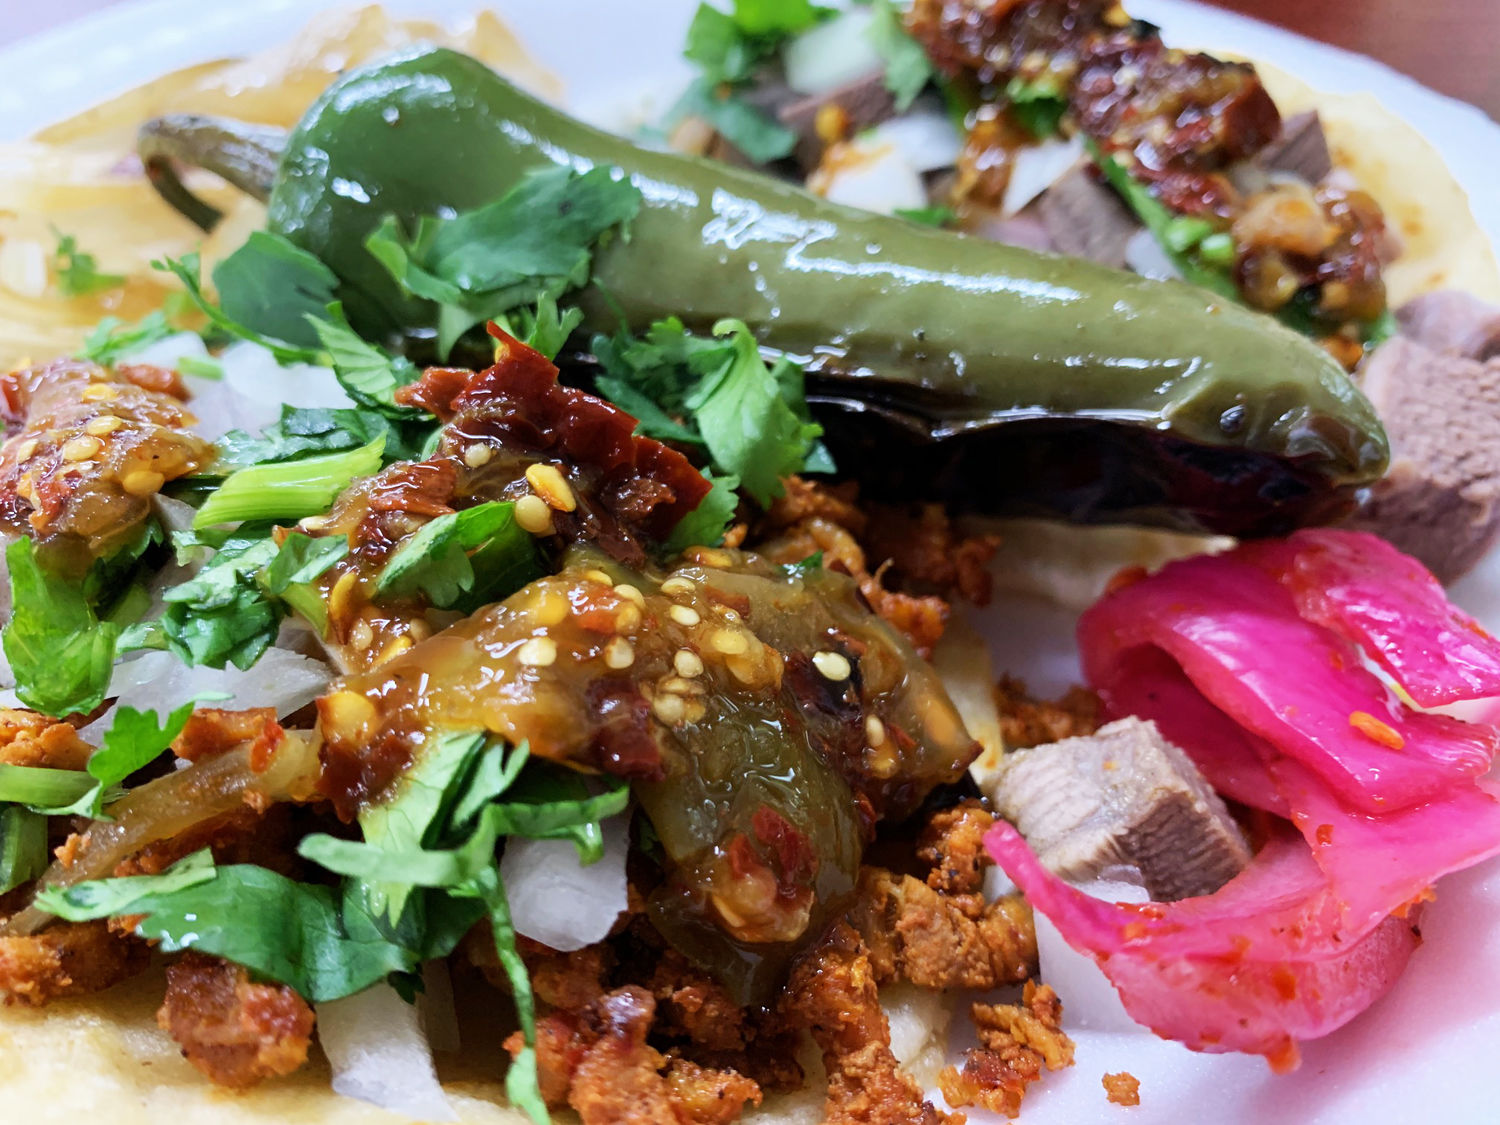 Al pastor and lengua tacos from Taqueria Pancho in West Fresno. (WTOP/Noah Frank)